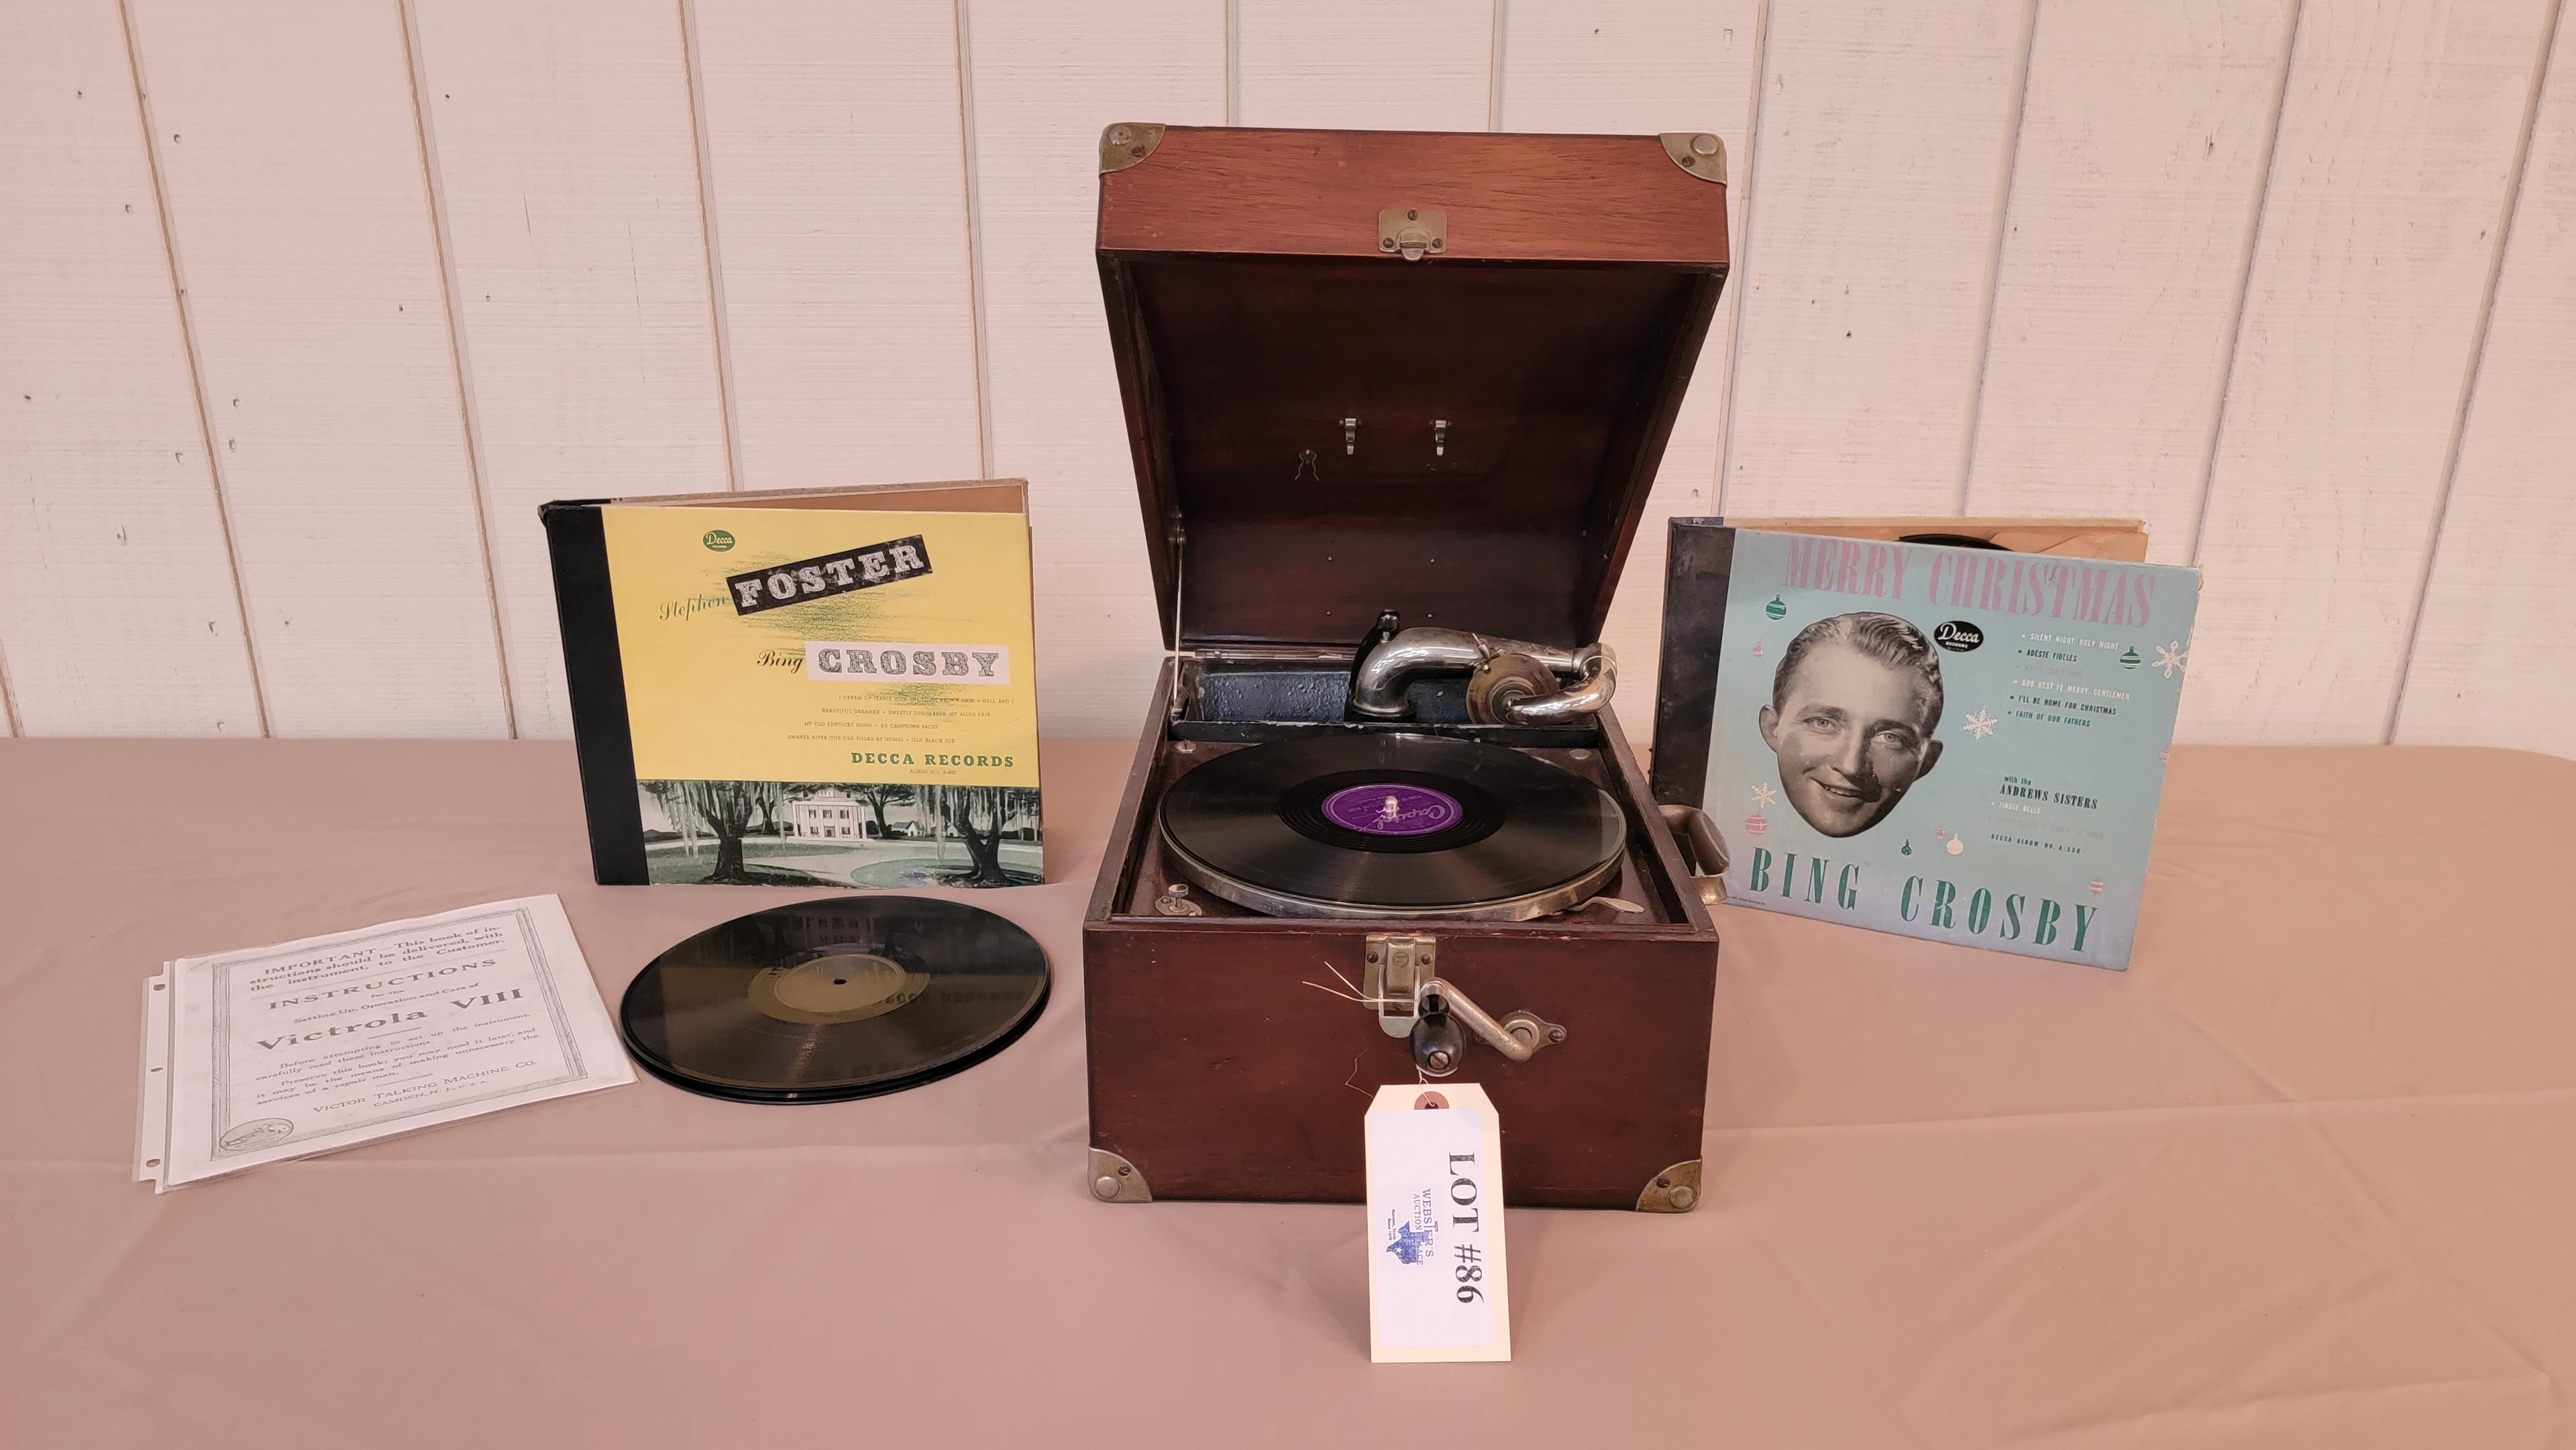 ANTIQUE VICTROLLA VIII WITH RECORDS IN WORKING CONDITION